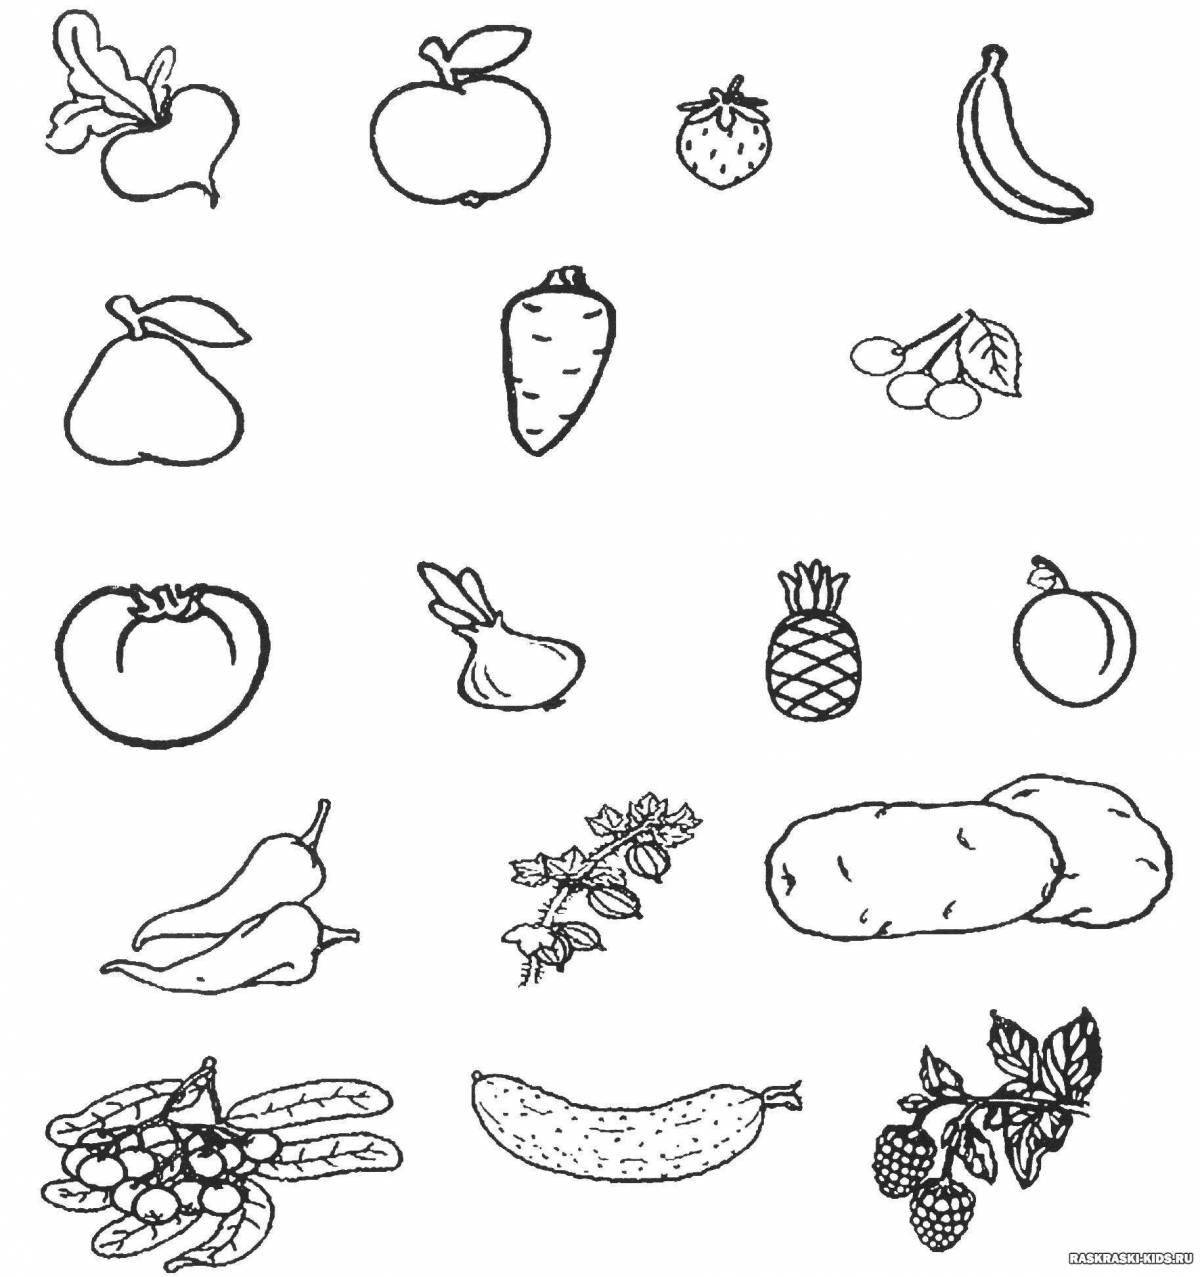 Joyful vegetable coloring book for 4-5 year olds